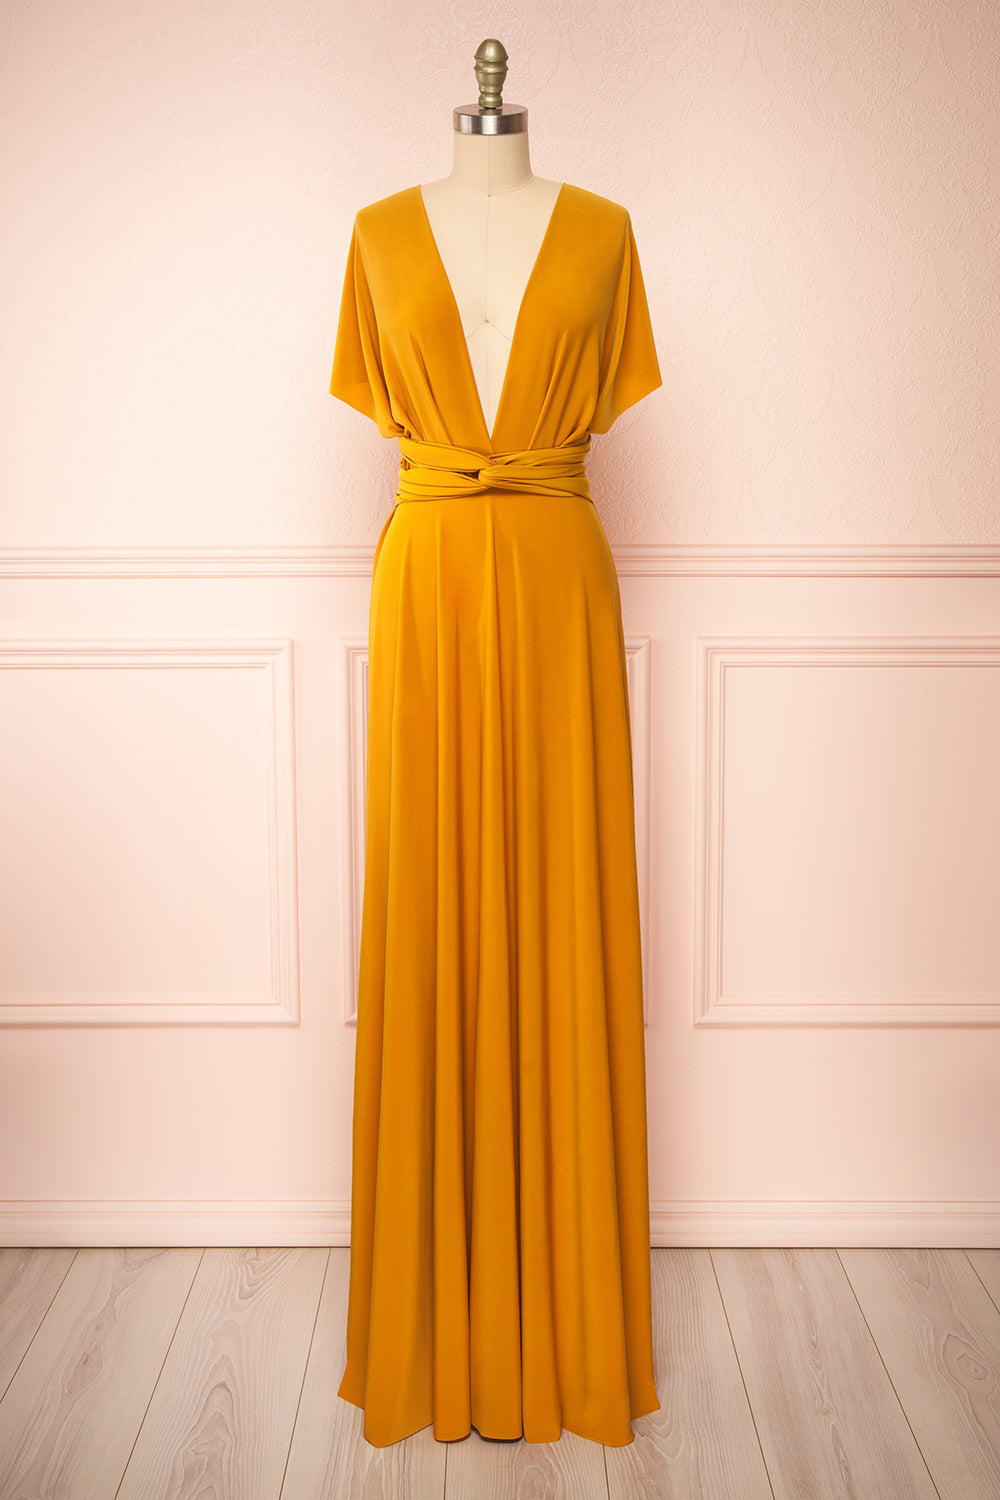 Yellow Bridesmaid Dresses: 18 Bright Looks [2023 Guide]